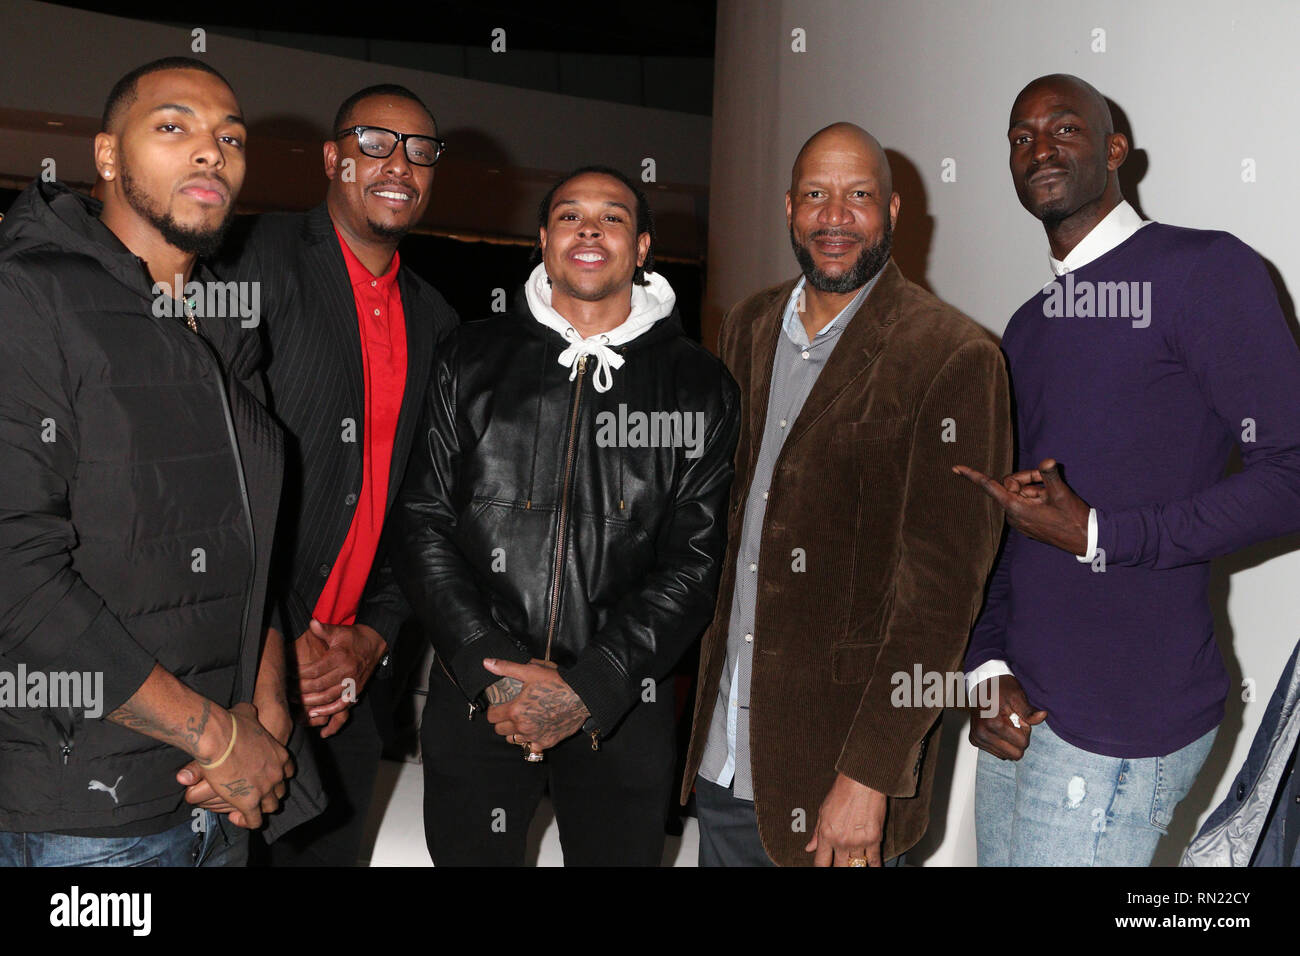 Charlotte, NC, USA. 15th Feb, 2019. Mikal Bridges, Paul Pierce, Shannon Brown, Derek Harper and Kevin Garnett at the Kenny 'The Jet' Smith 2019 NBA All-Star Bash at the NASCAR Hall Of Fame in Charlotte, North Carolina on February 15, 2019. Credit: Walik Goshorn/Media Punch/Alamy Live News Stock Photo